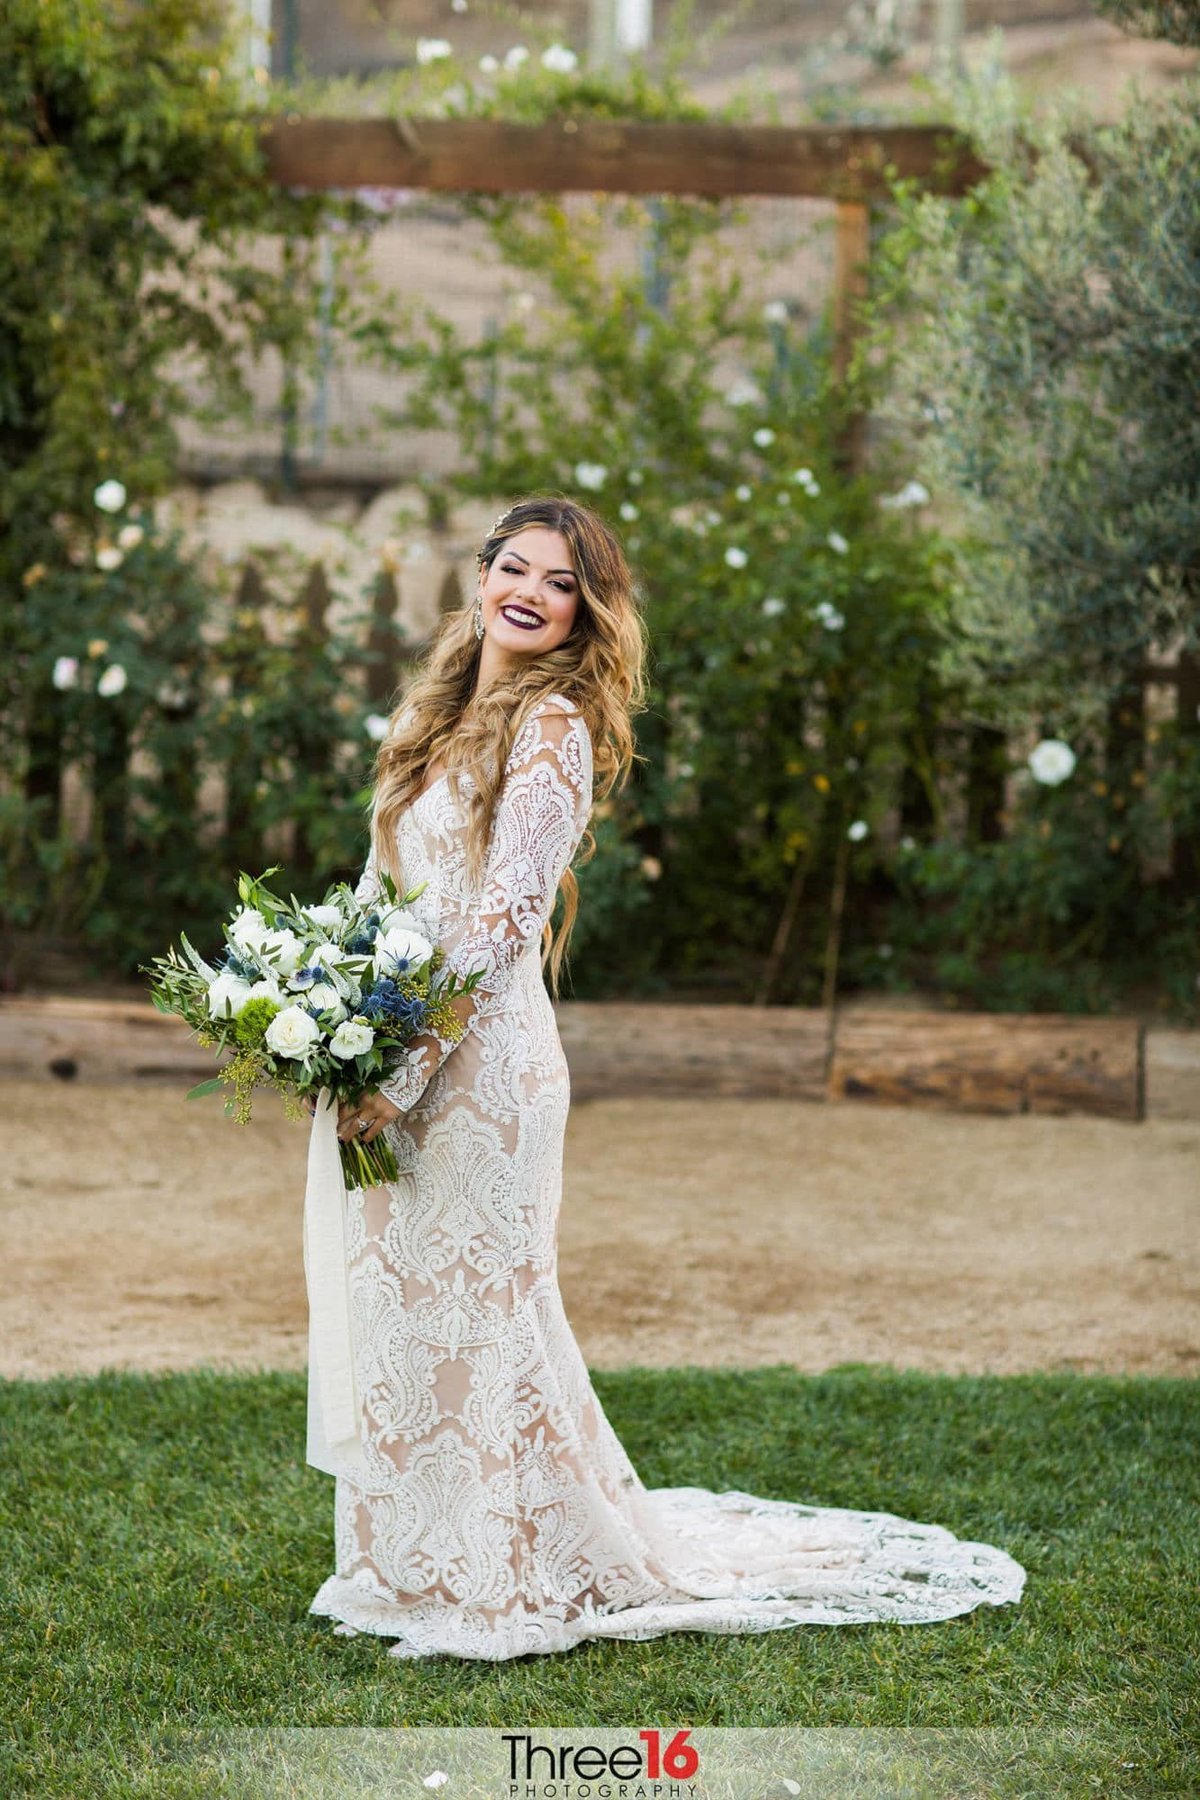 Bride poses on the grass with her bouquet and dress train fanned out